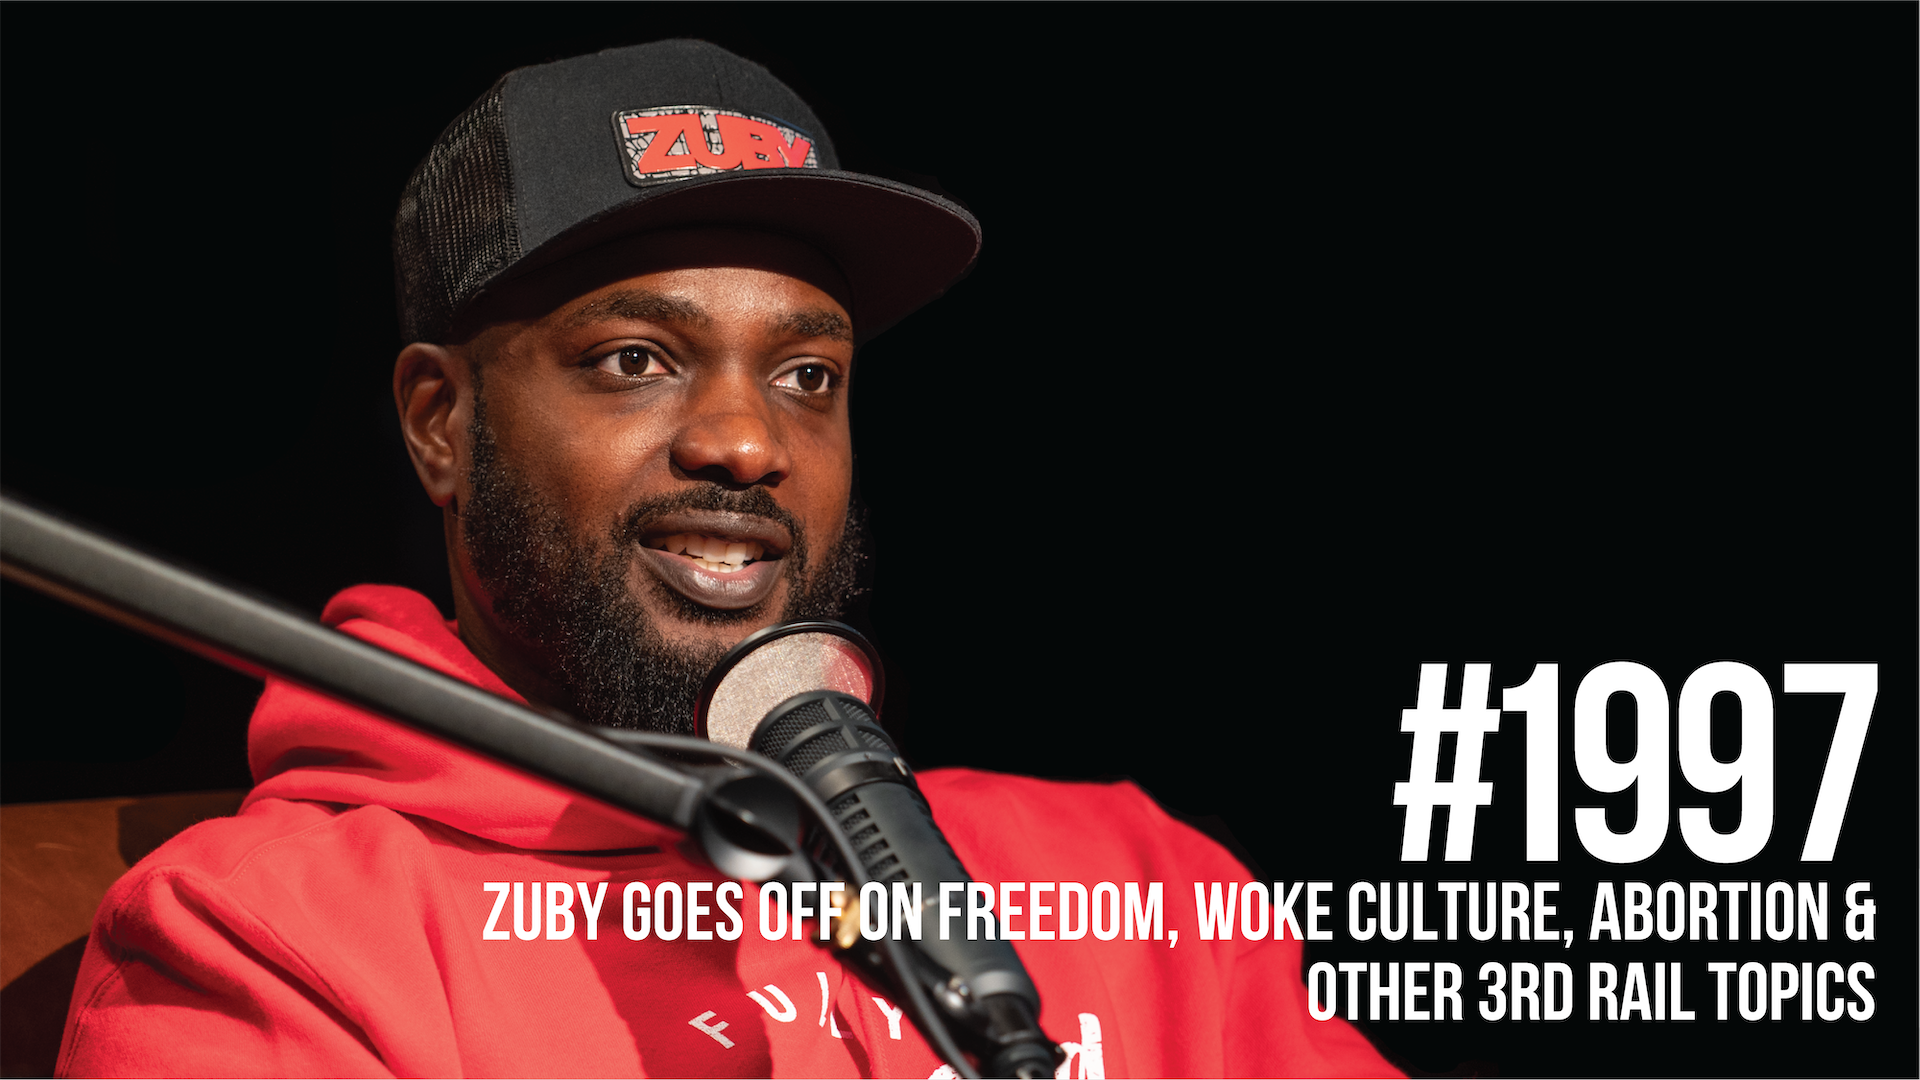 1997: Zuby Goes Off on Woke Culture, Freedom, Abortion & Other Third Rail Topics